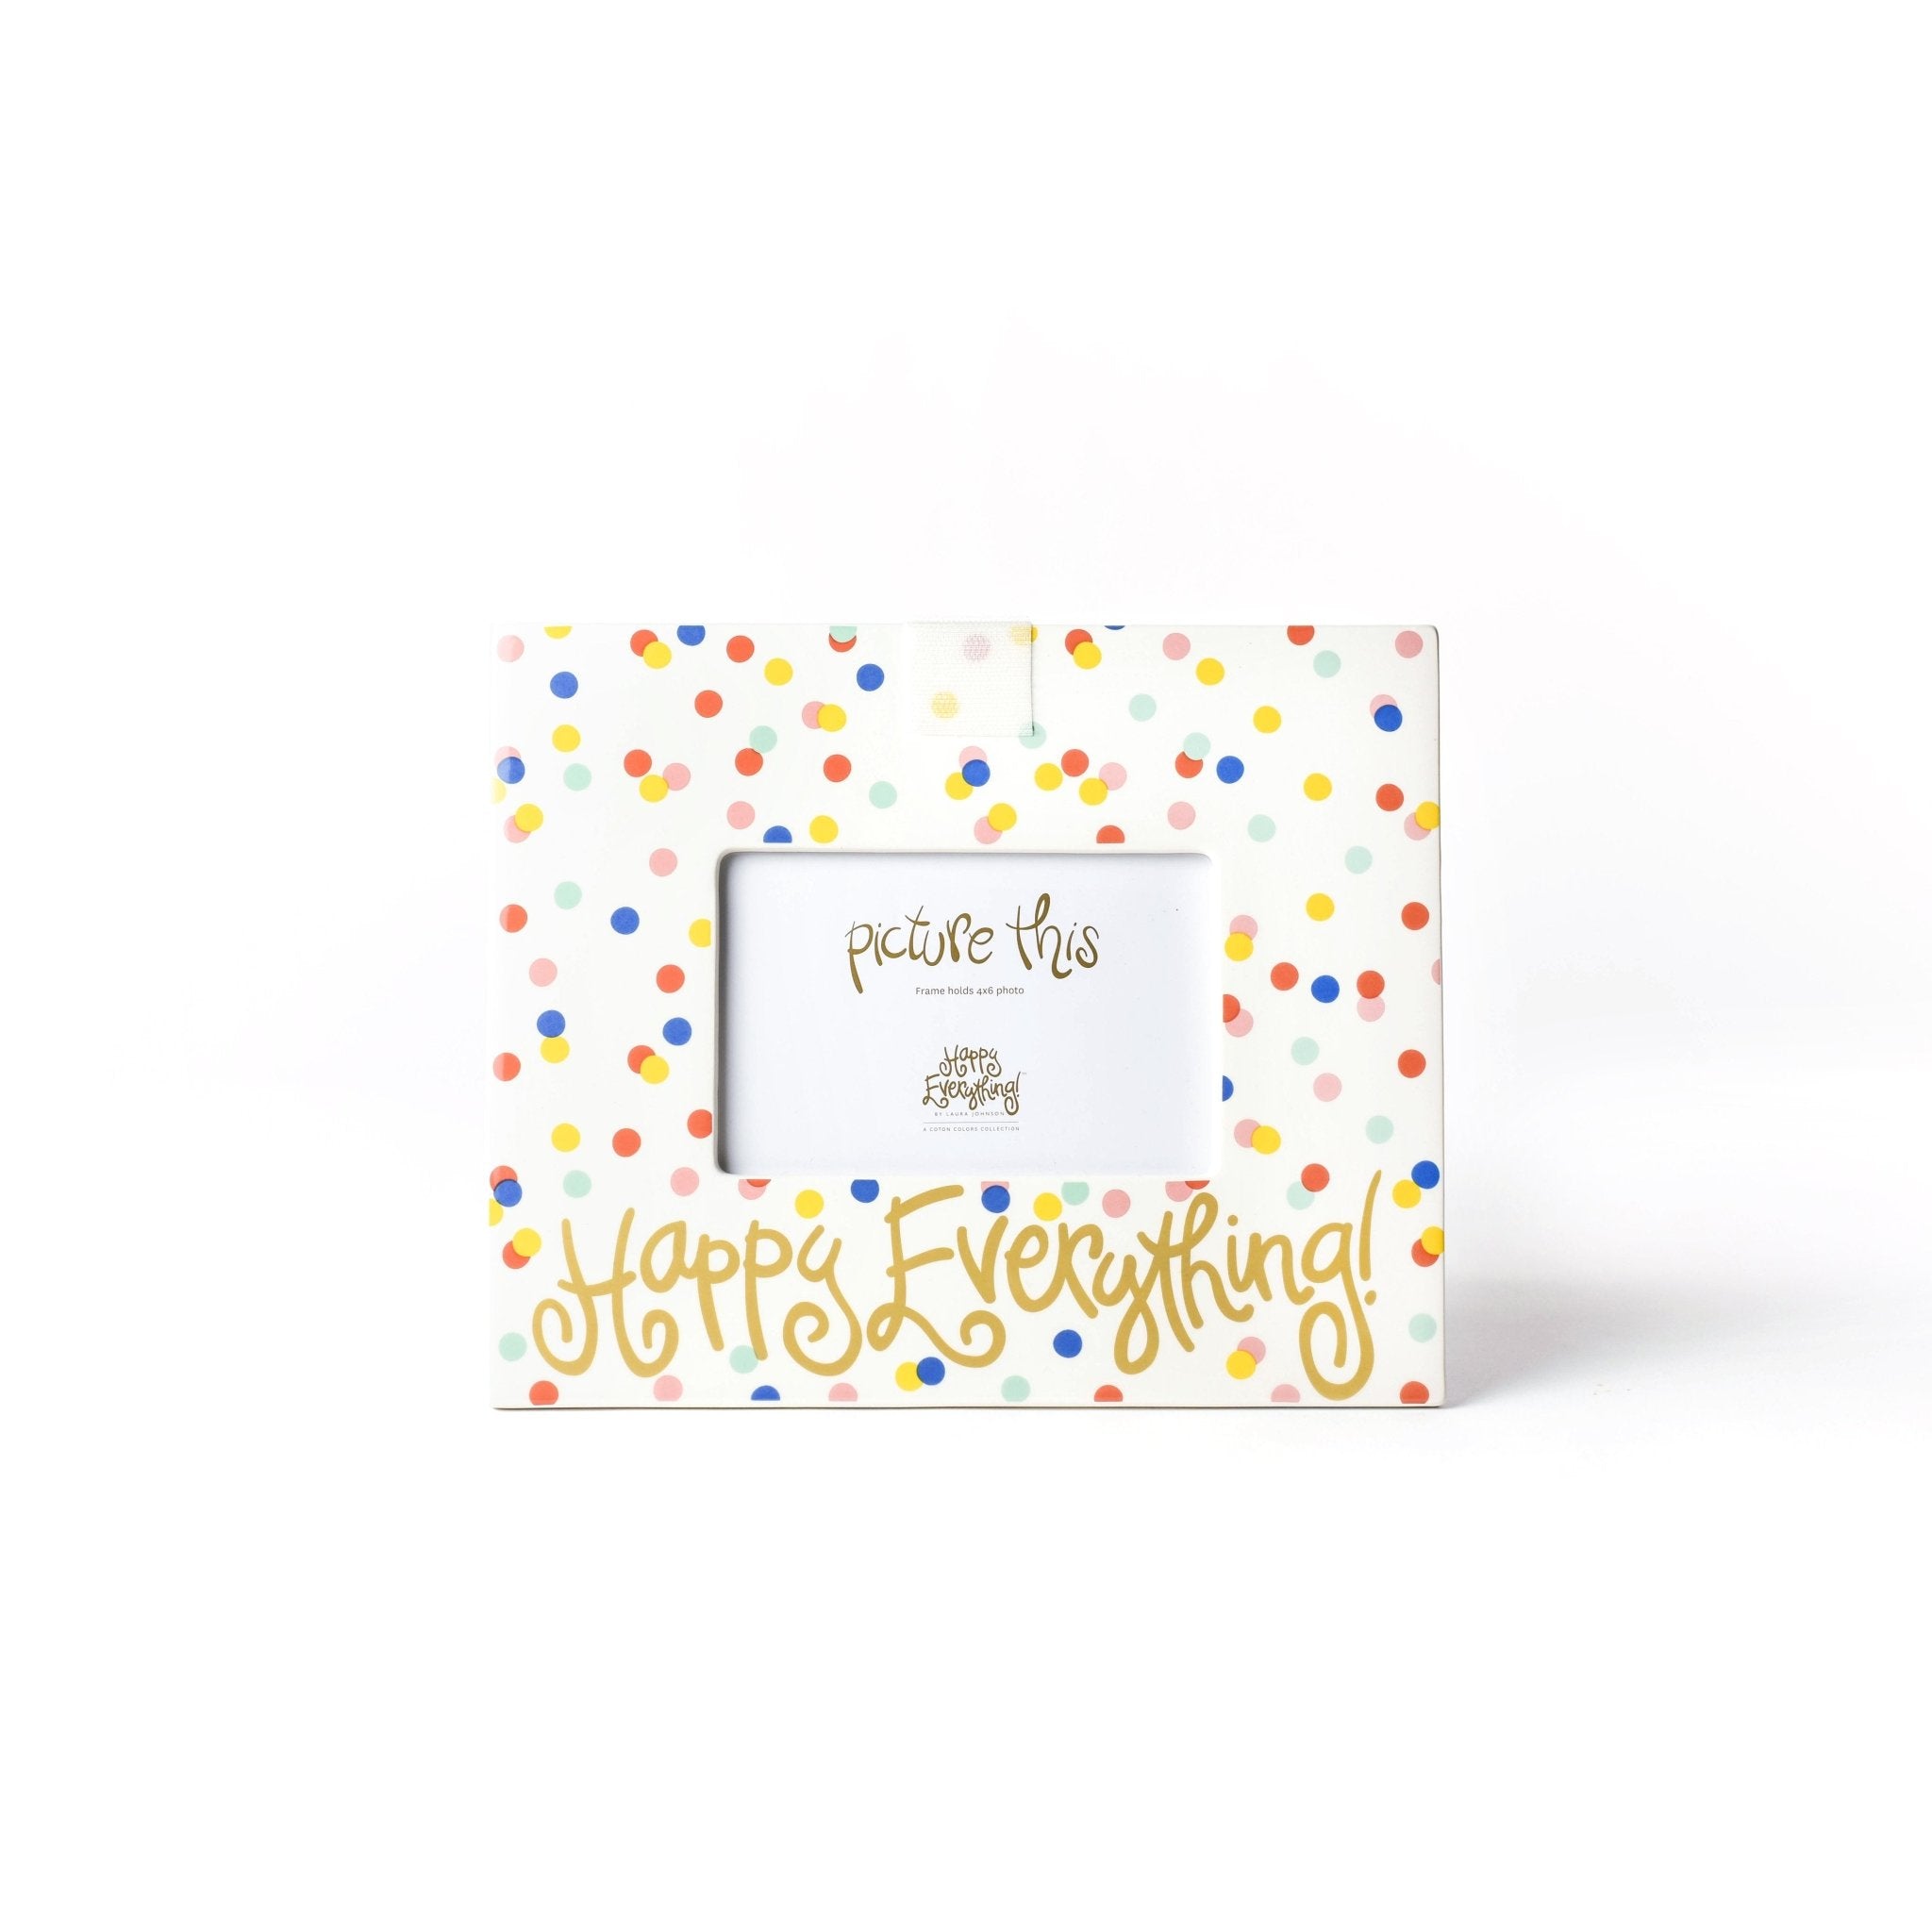 Happy Dot Happy Everything! Mini Frame - So & Sew Boutique